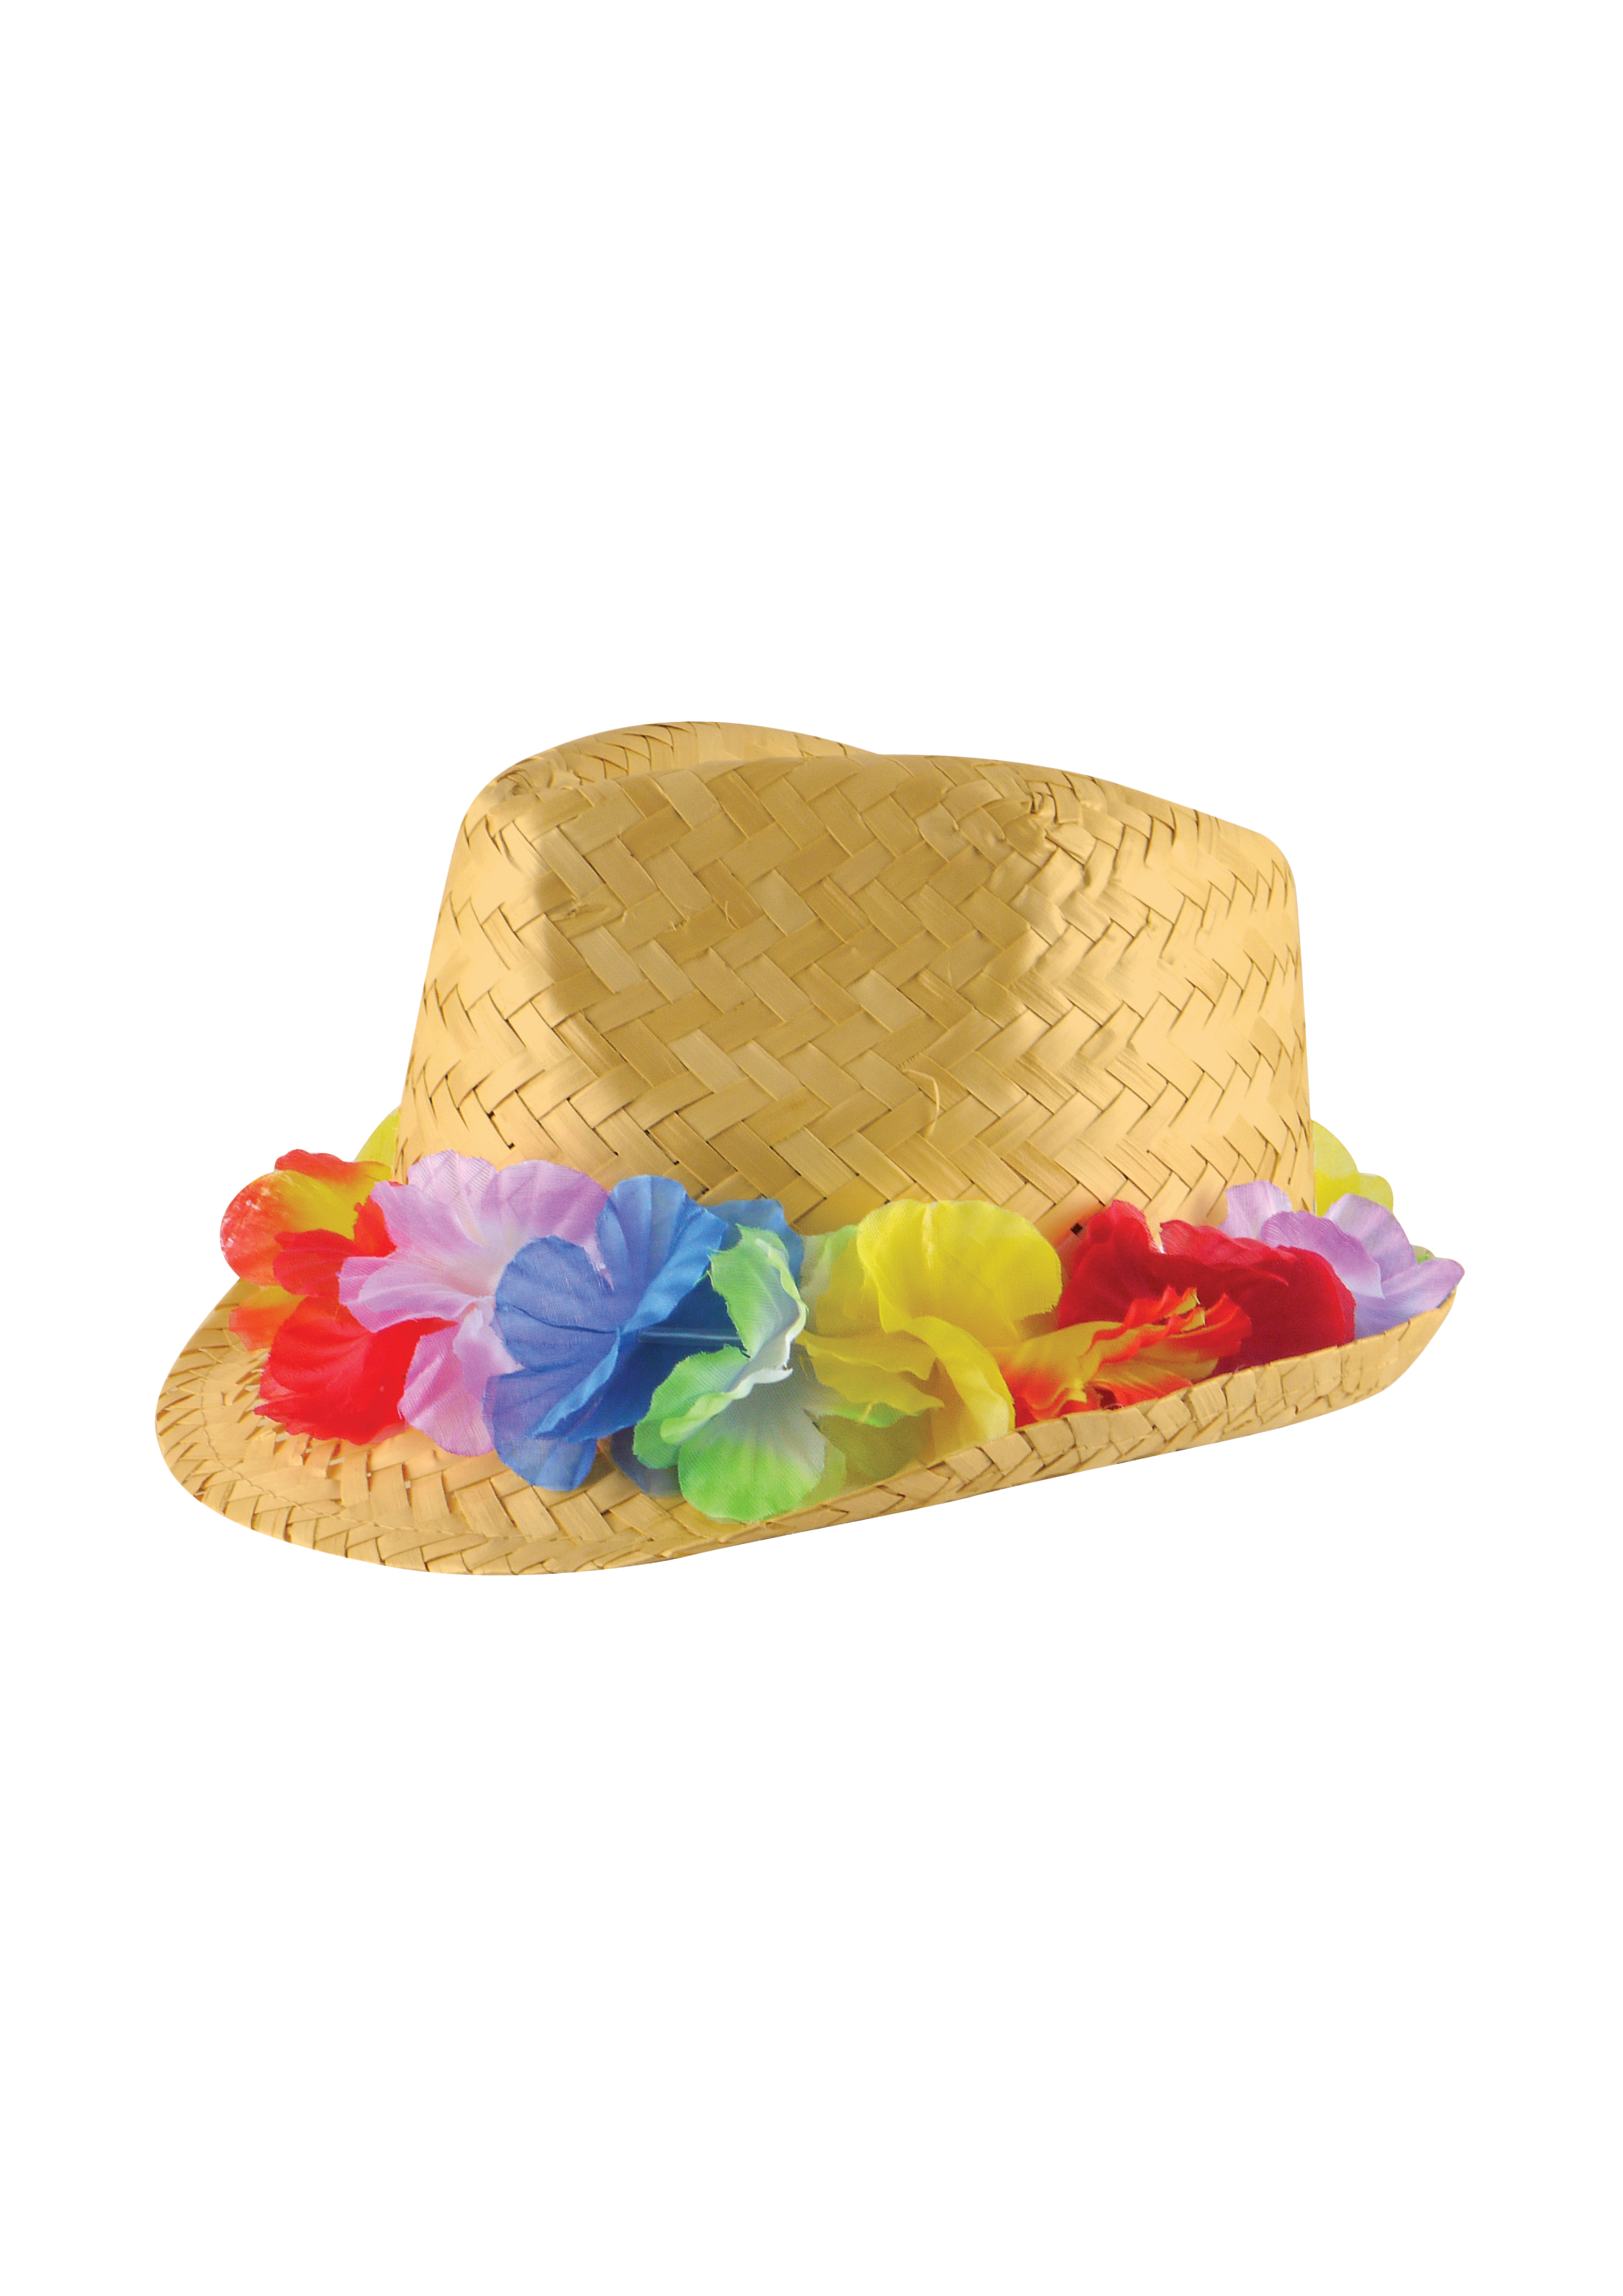 Hat Gangster Straw W/flower Band Adult